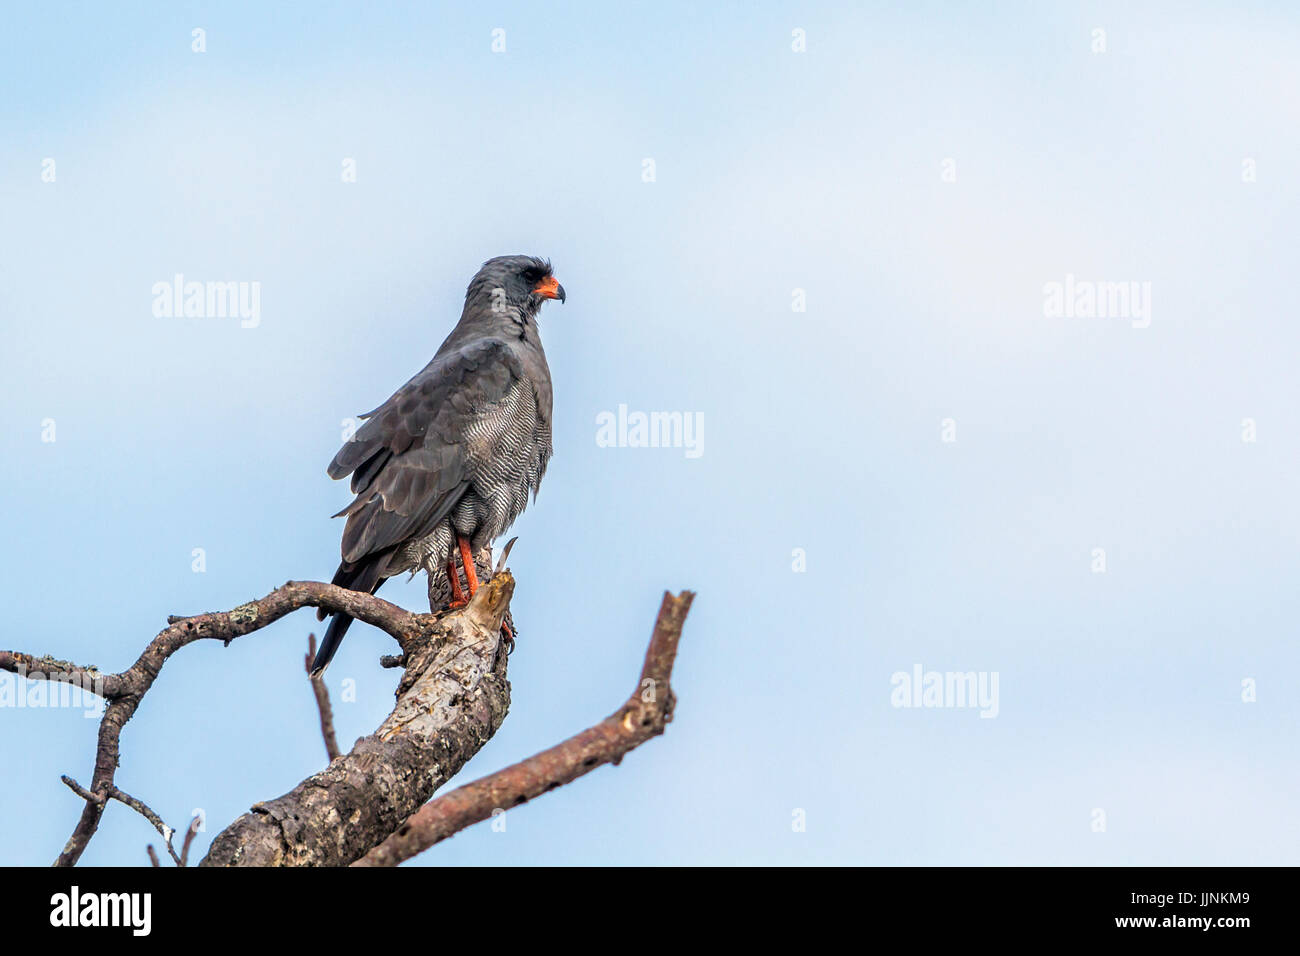 Dark chanting-goshawk in Kruger national park, South Africa ; Specie Melierax metabates family of Accipitridae Stock Photo